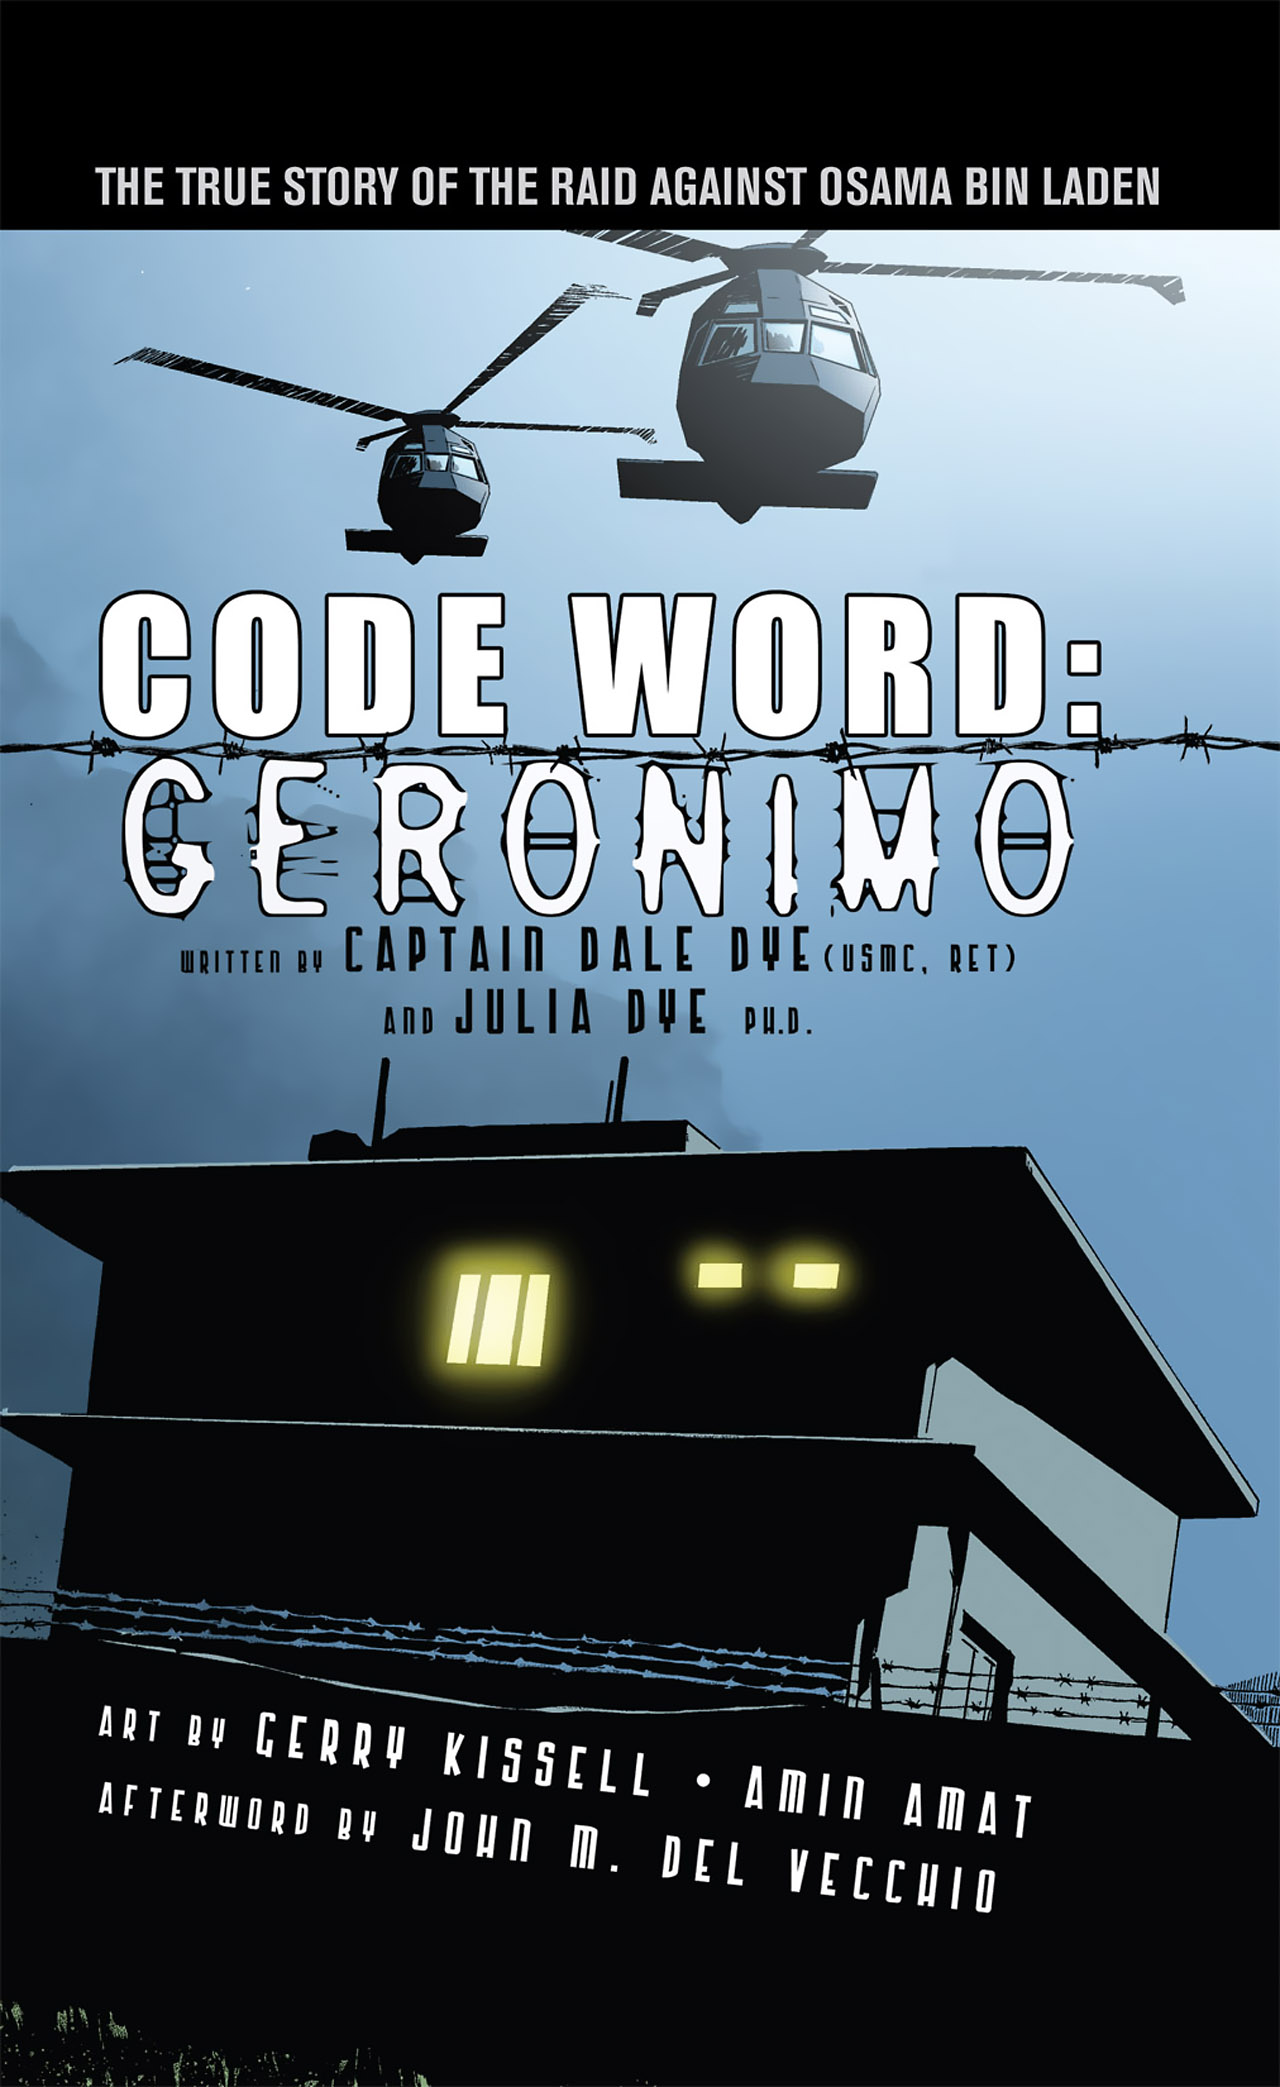 Read online Code Word: Geronimo comic -  Issue # TPB - 1